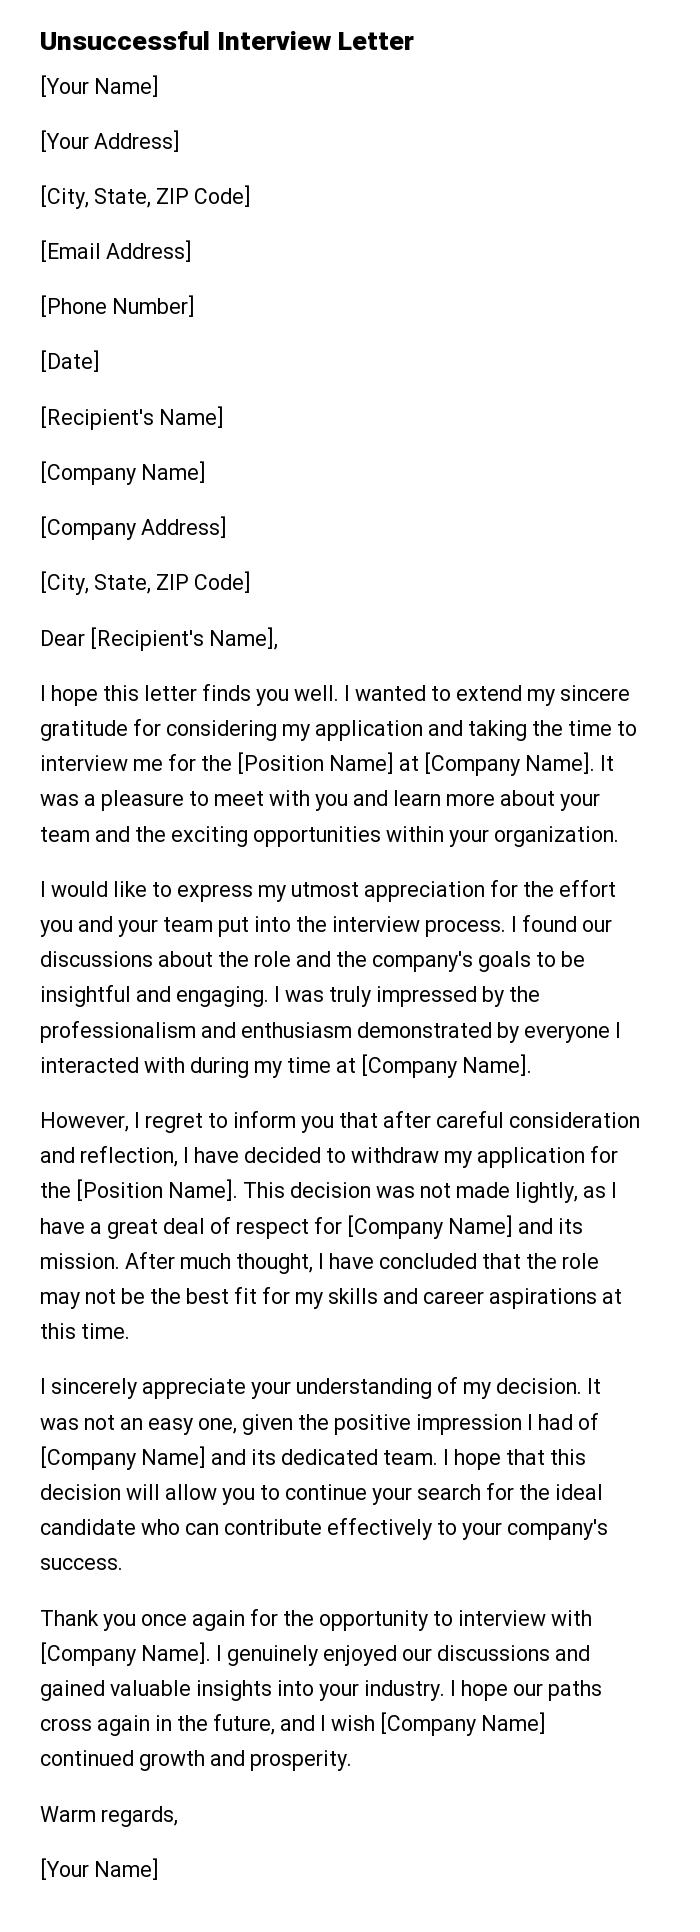 Unsuccessful Interview Letter